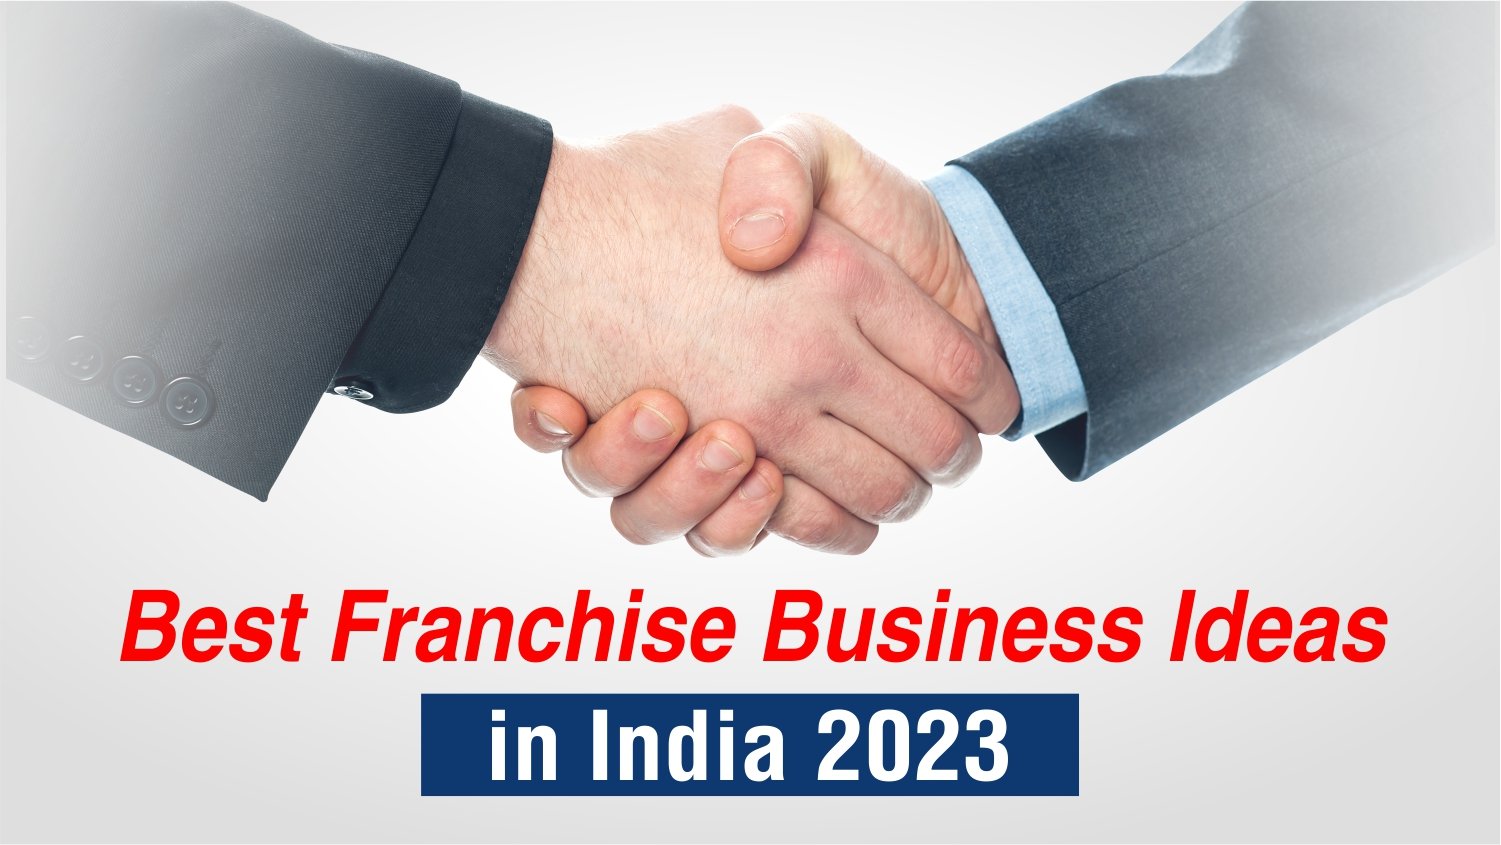 Franchise Business ideas in India 2023